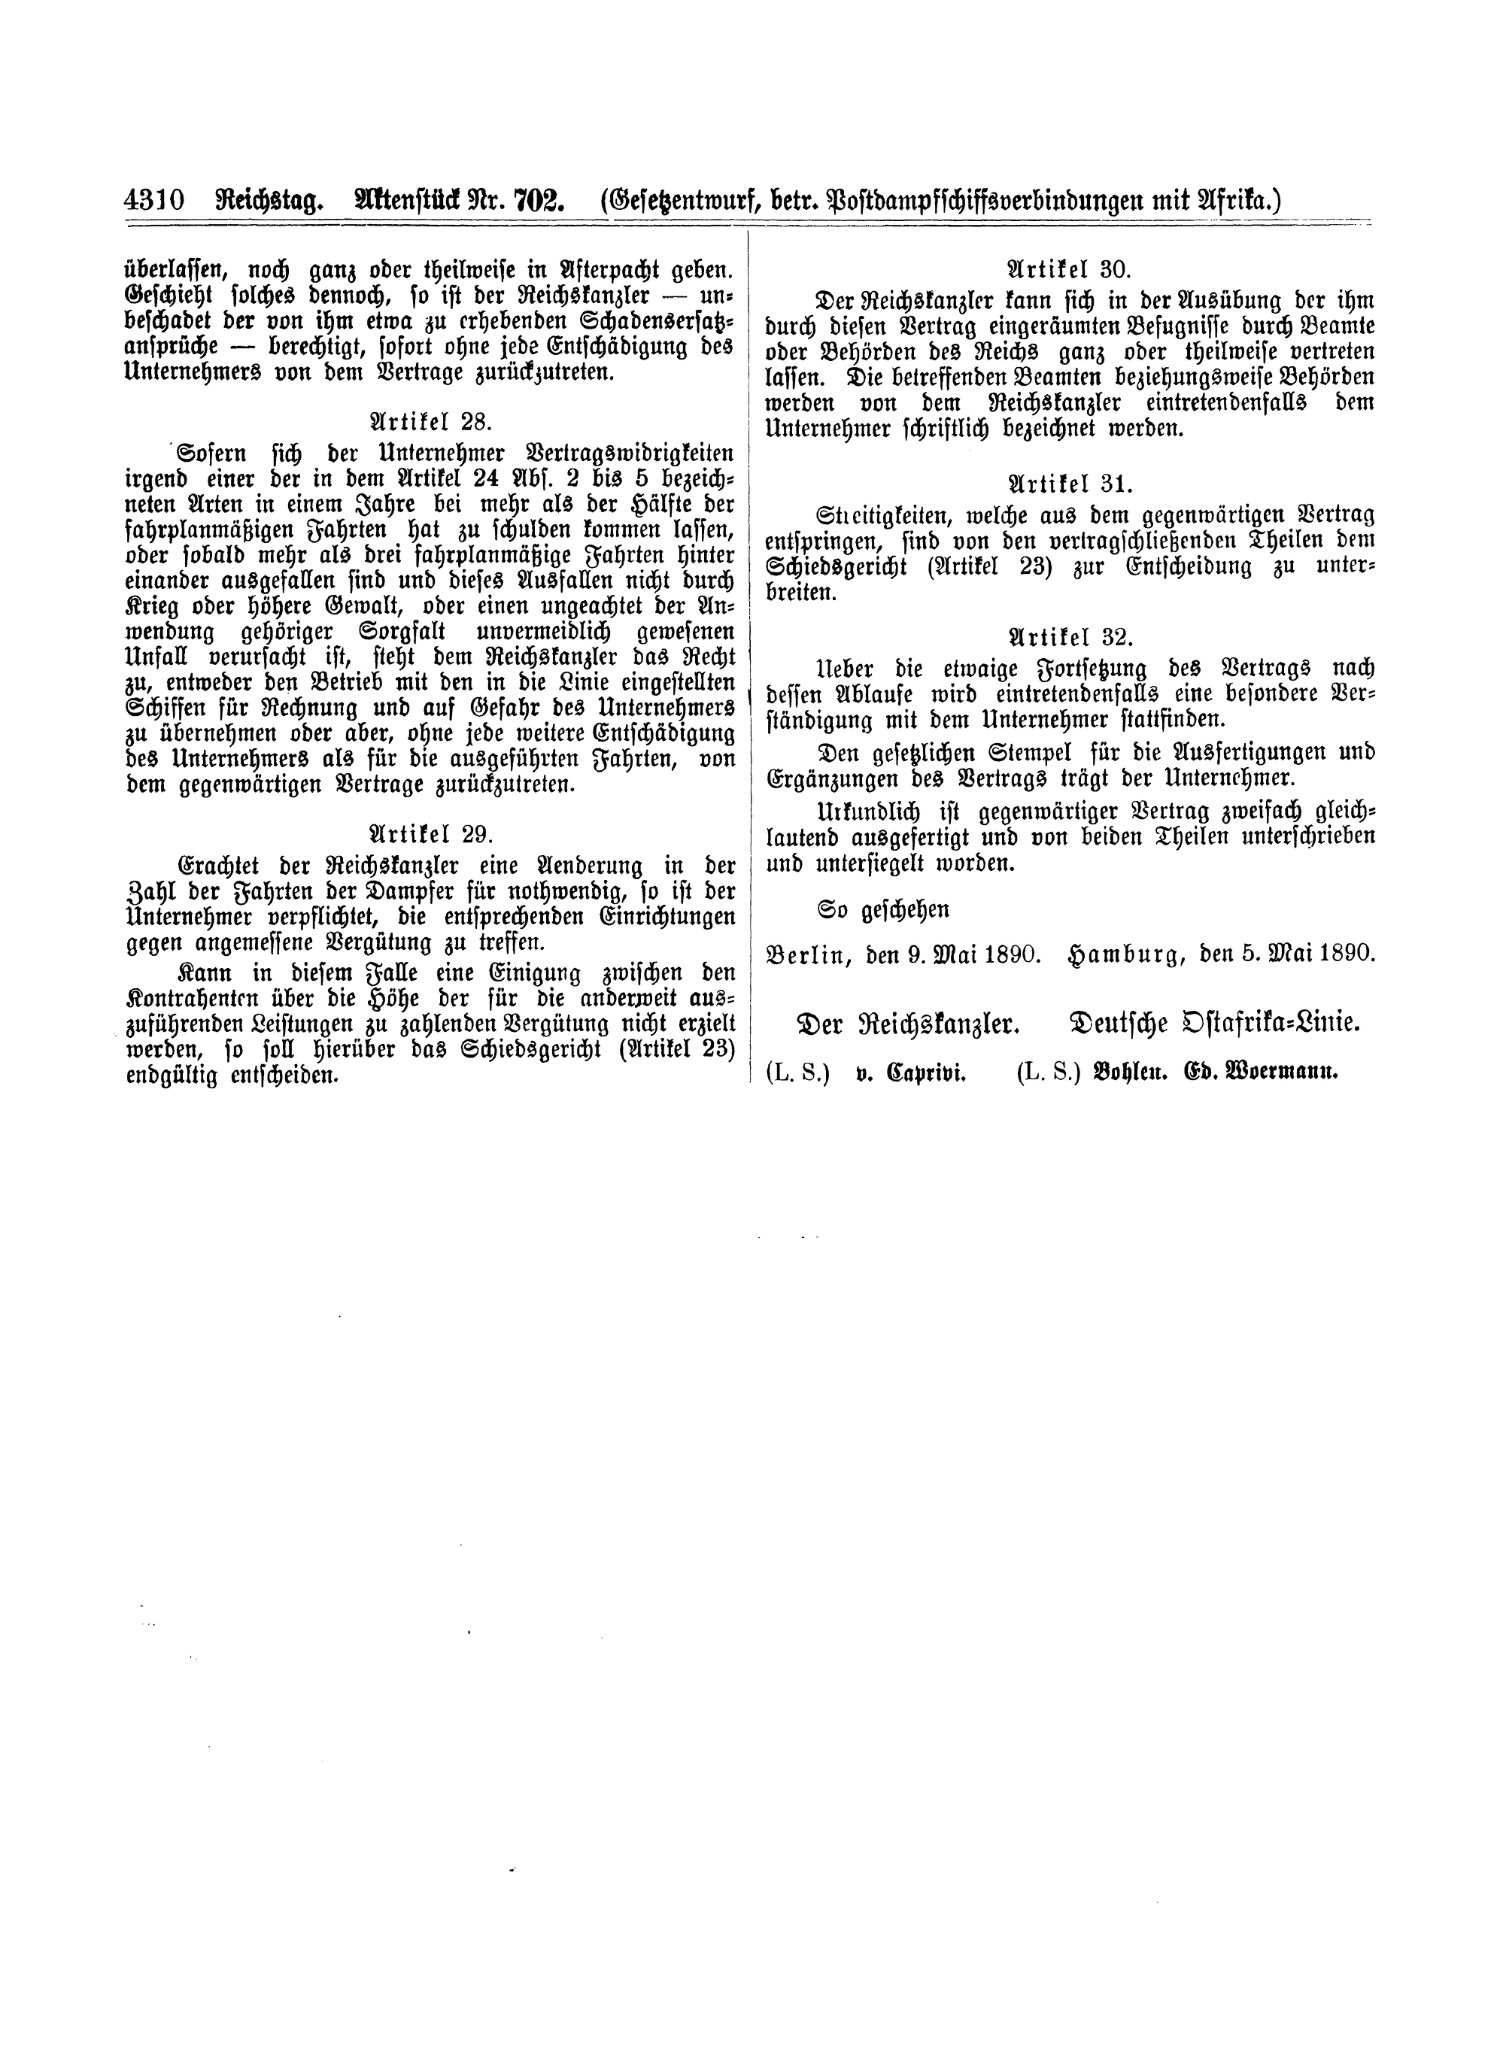 Scan of page 4310